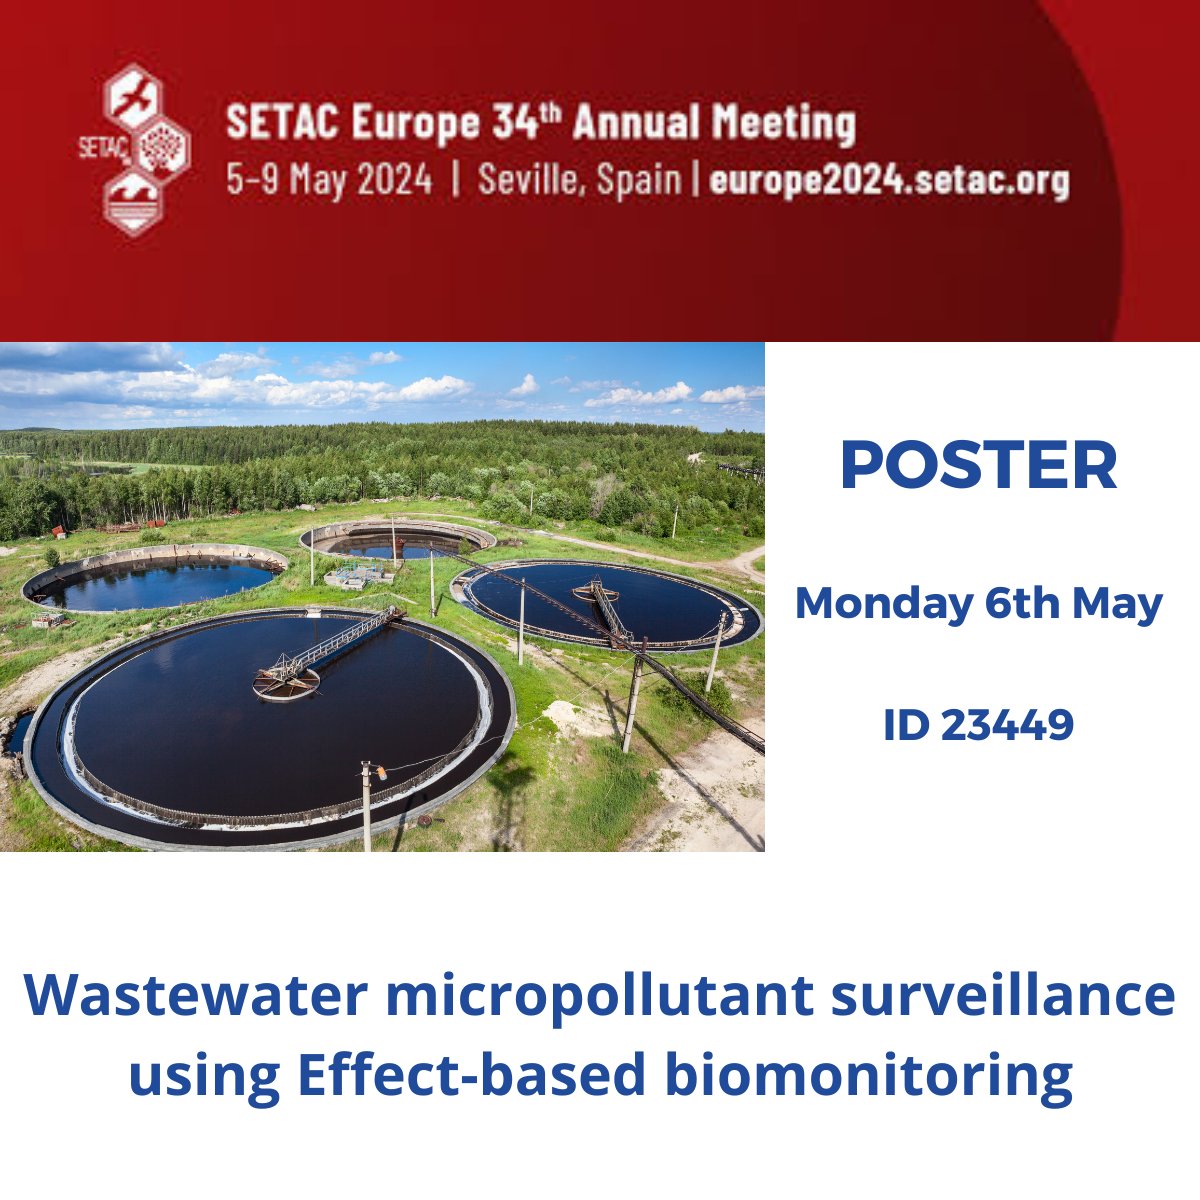 📢 Wastewater Micropollutant Surveillance Using Effect-based Biomonitoring
 
Monday, 6 May 2024 - 3.06 - Poster ID 23449 - Exhibition Hall - 9:30 am - 18:15 pm
 
#biomonitoring #setac2024 #CEC #micropollutants